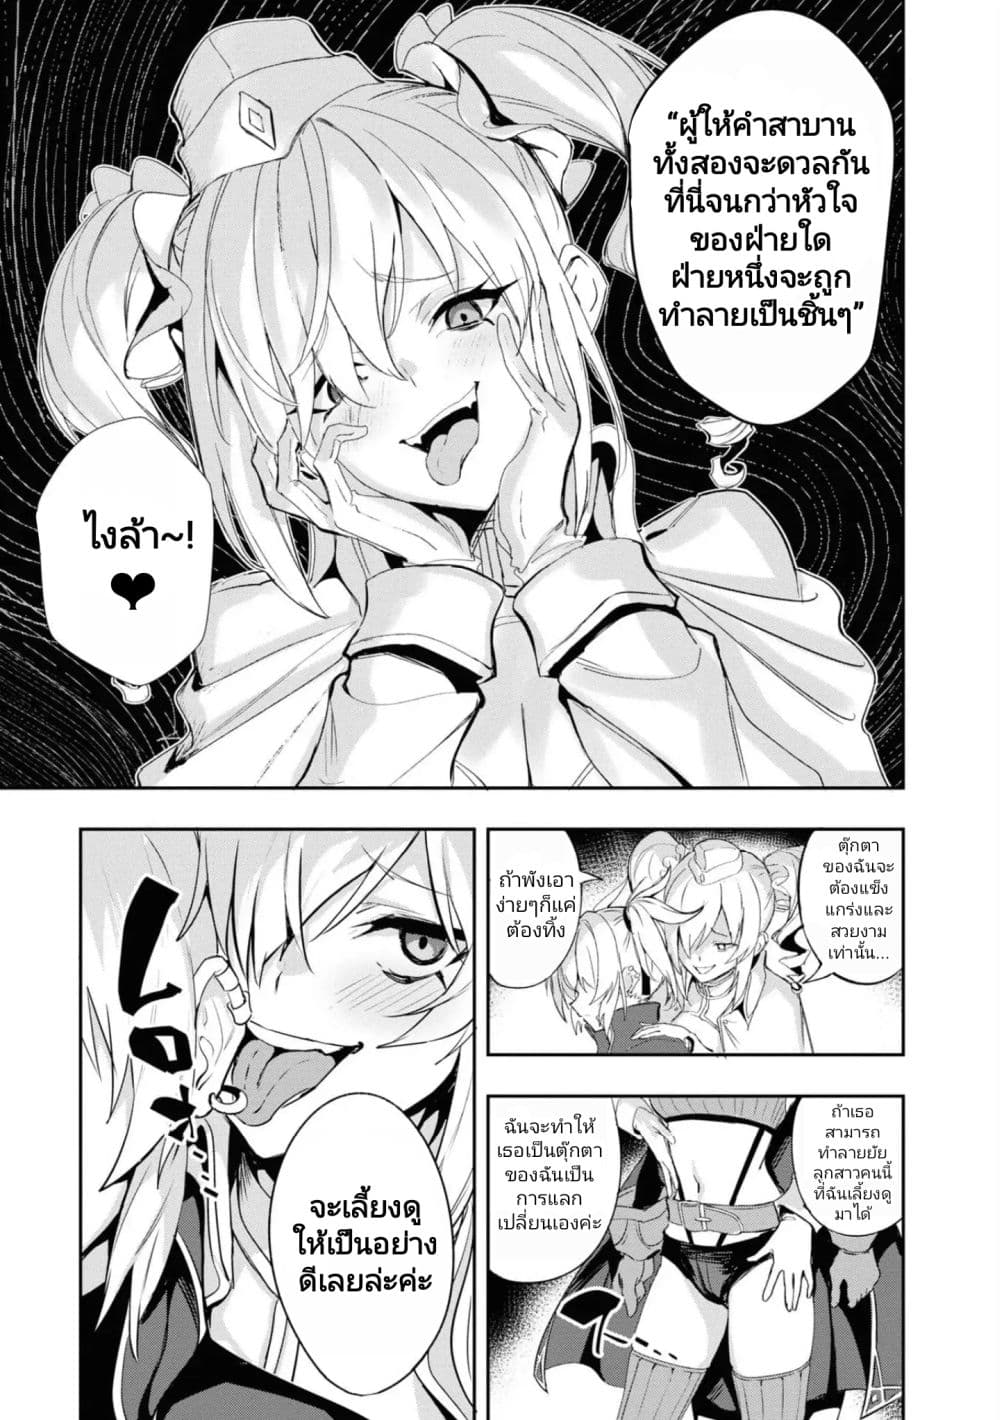 Witch Guild Fantasia 9 (3)